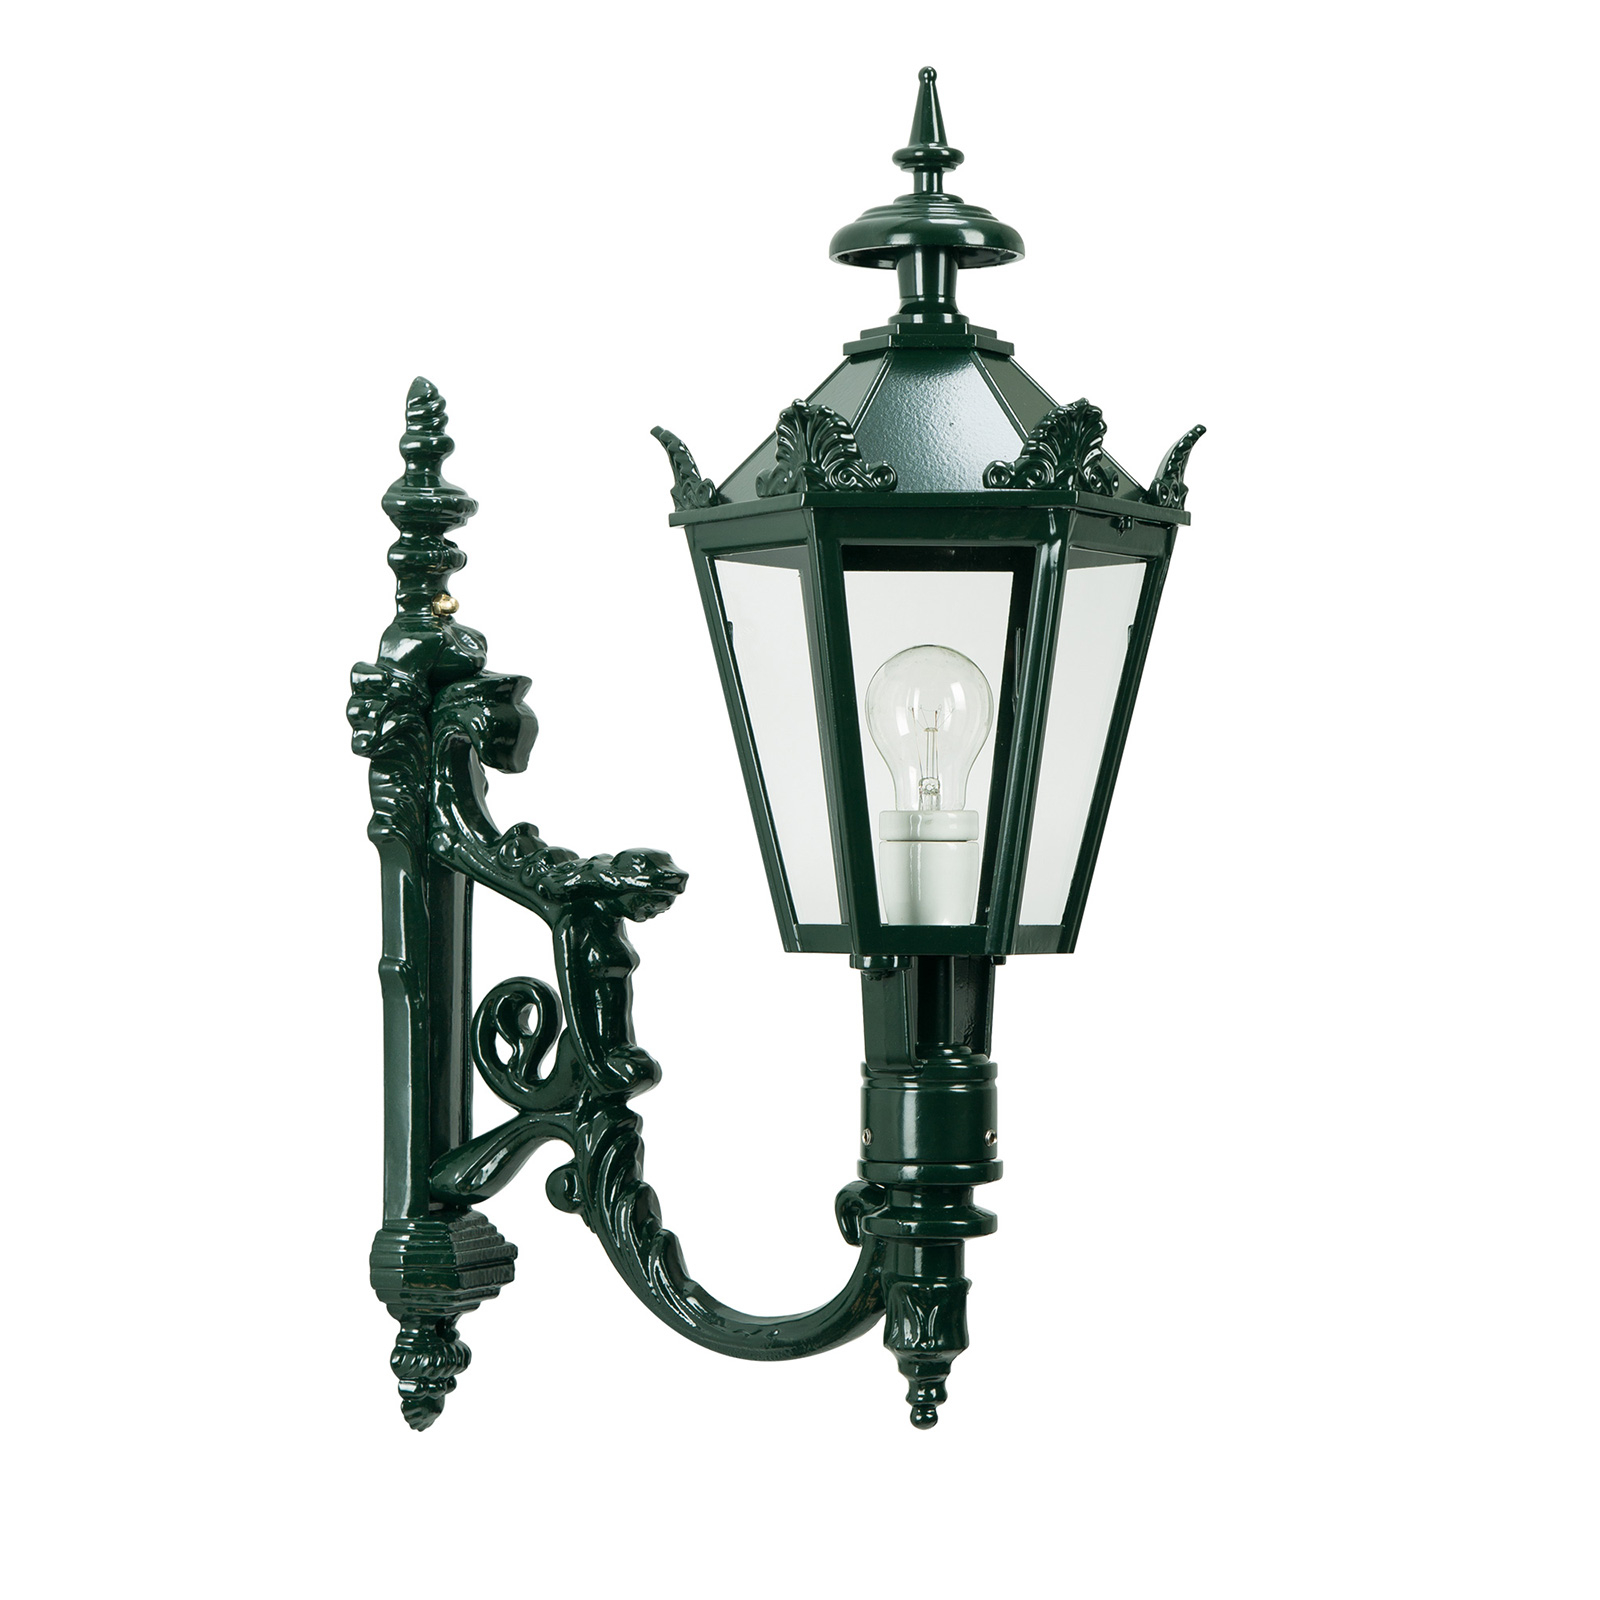 Charles outdoor wall light, green